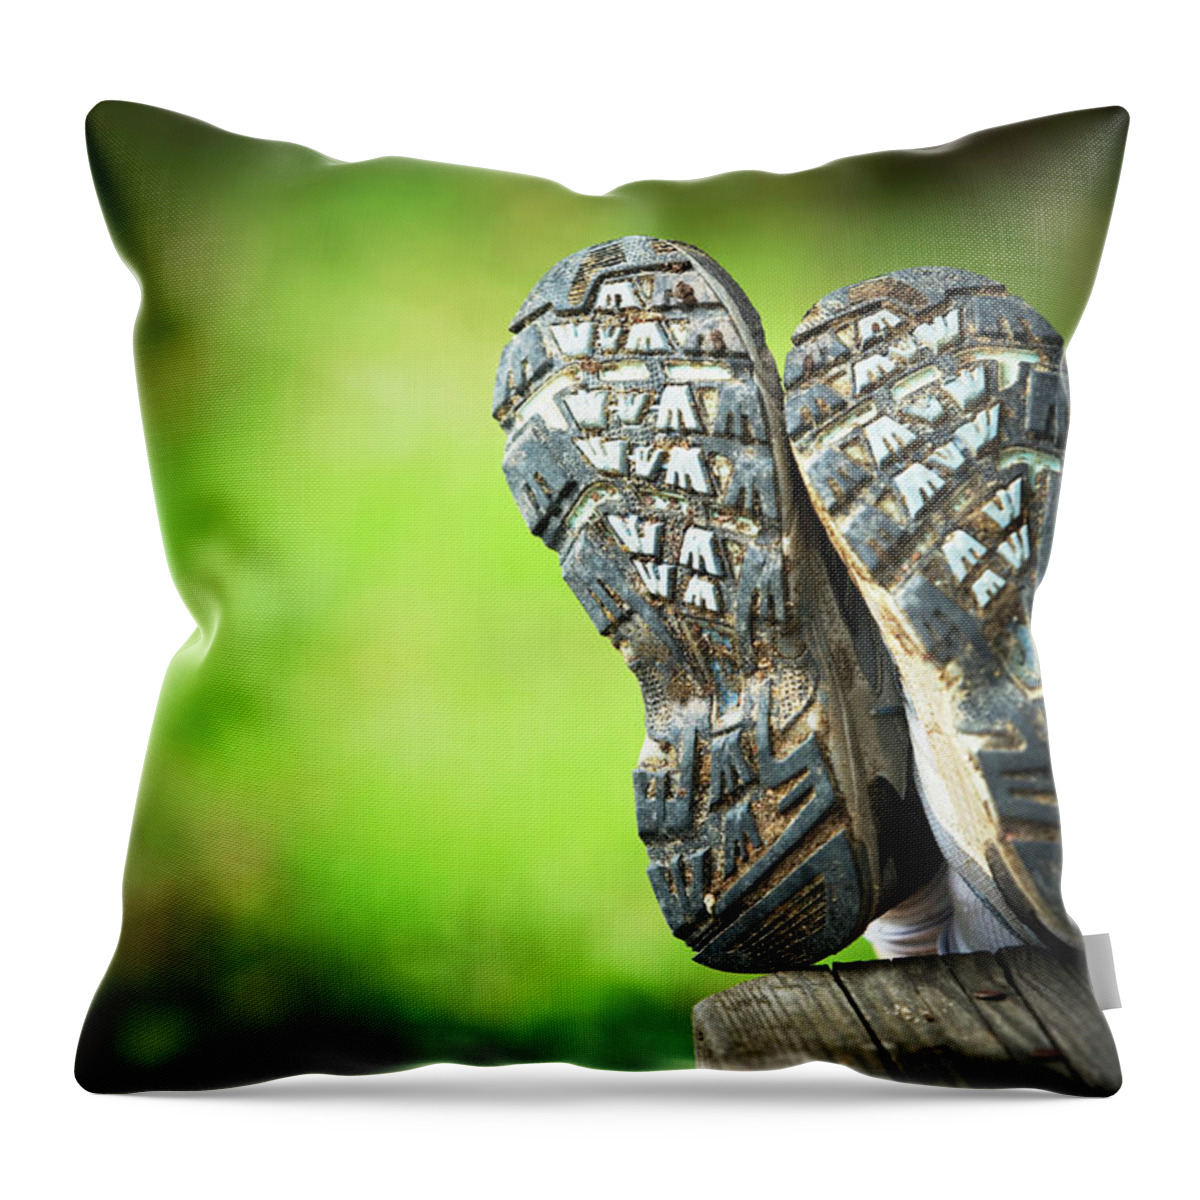 Alone Throw Pillow featuring the photograph Bottom View Of Hiking Shoes by Ron Koeberer